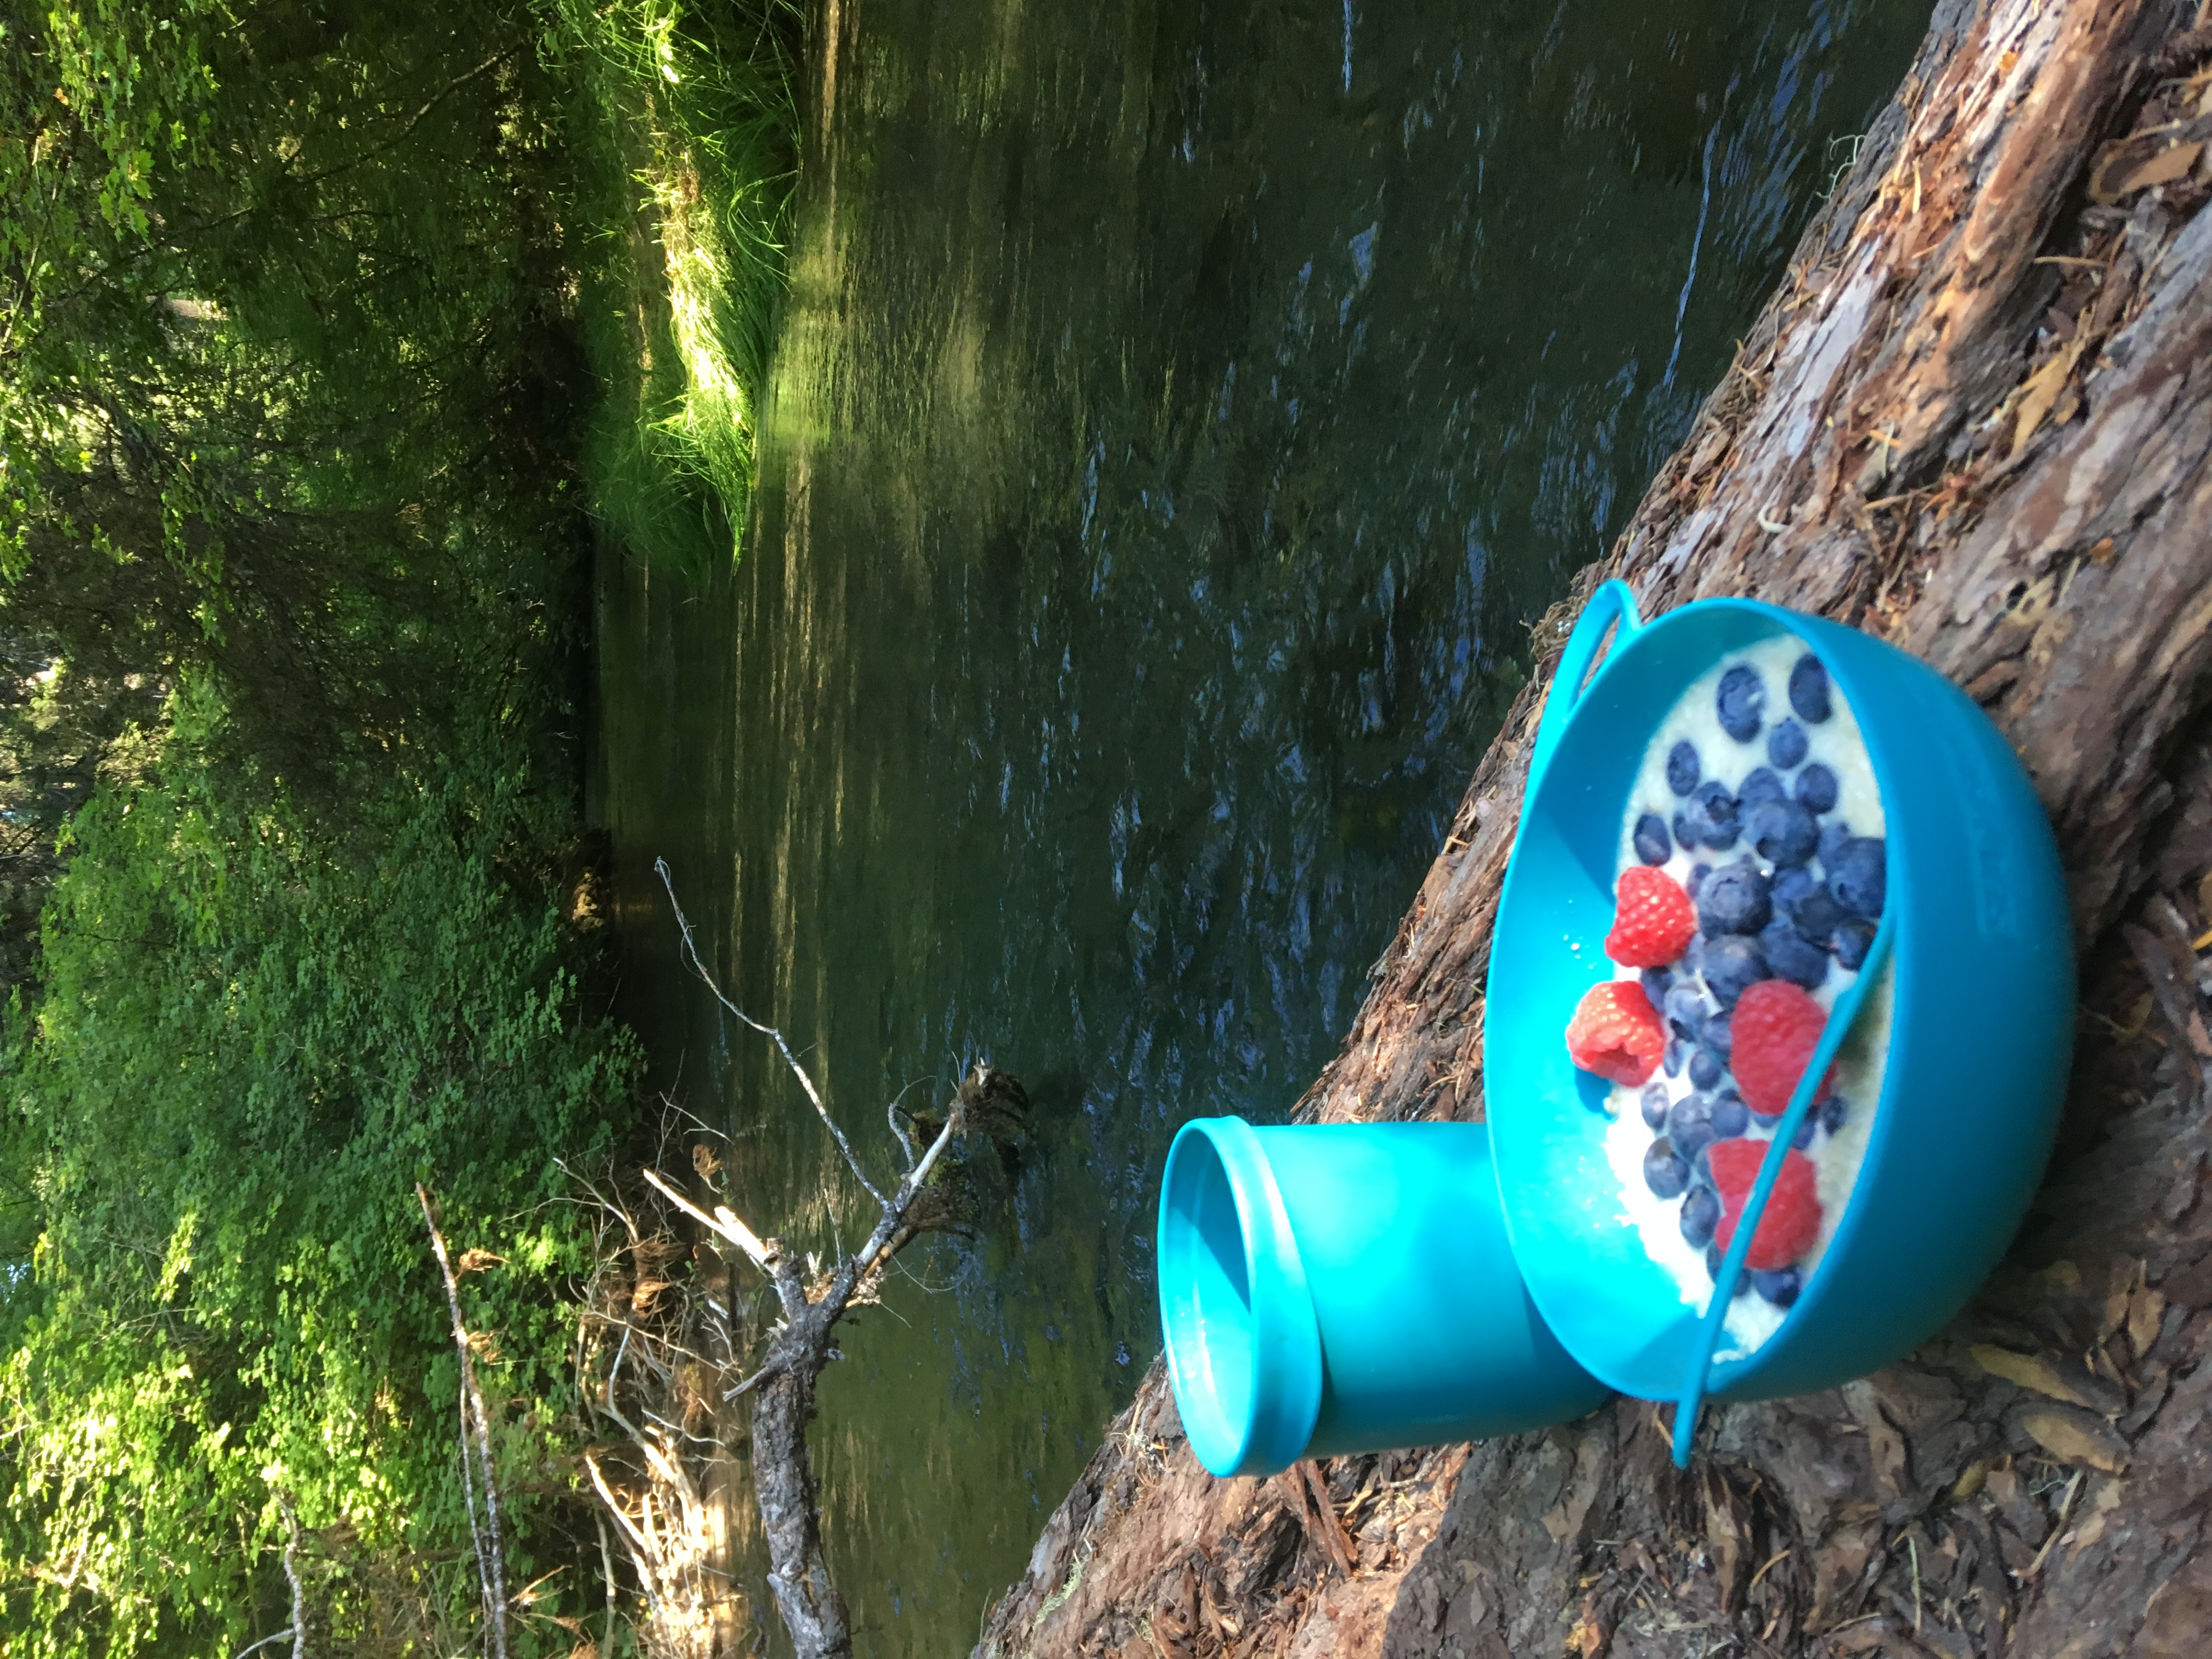 Breakfast by Union Creek at the back of our campsite (not sure why this repeatedly shows up sideways).